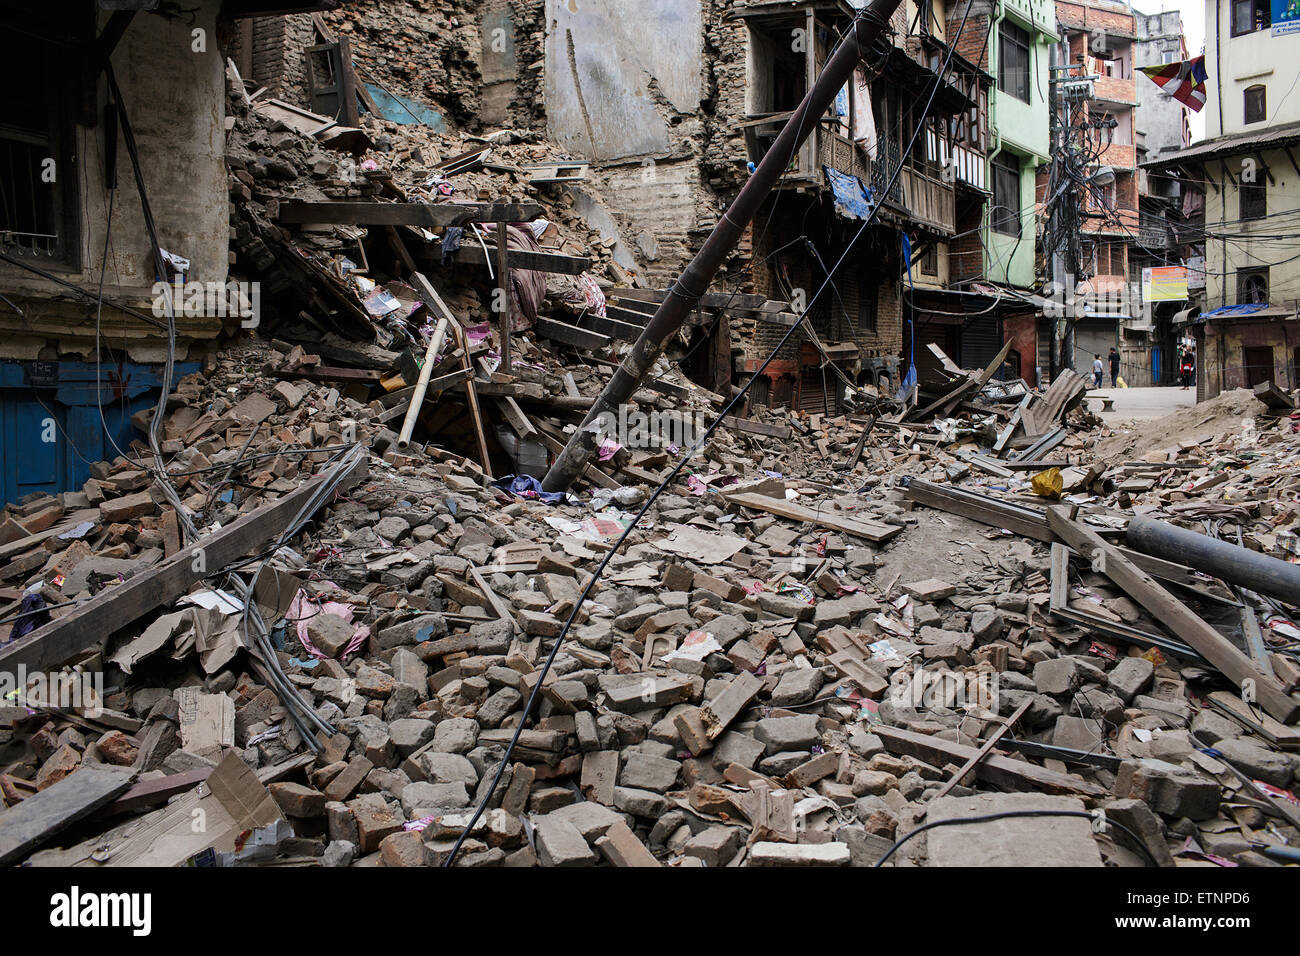 A ruins of destroyed house in the old city of Kathmandu, Nepal a day after the earthquake. Stock Photo